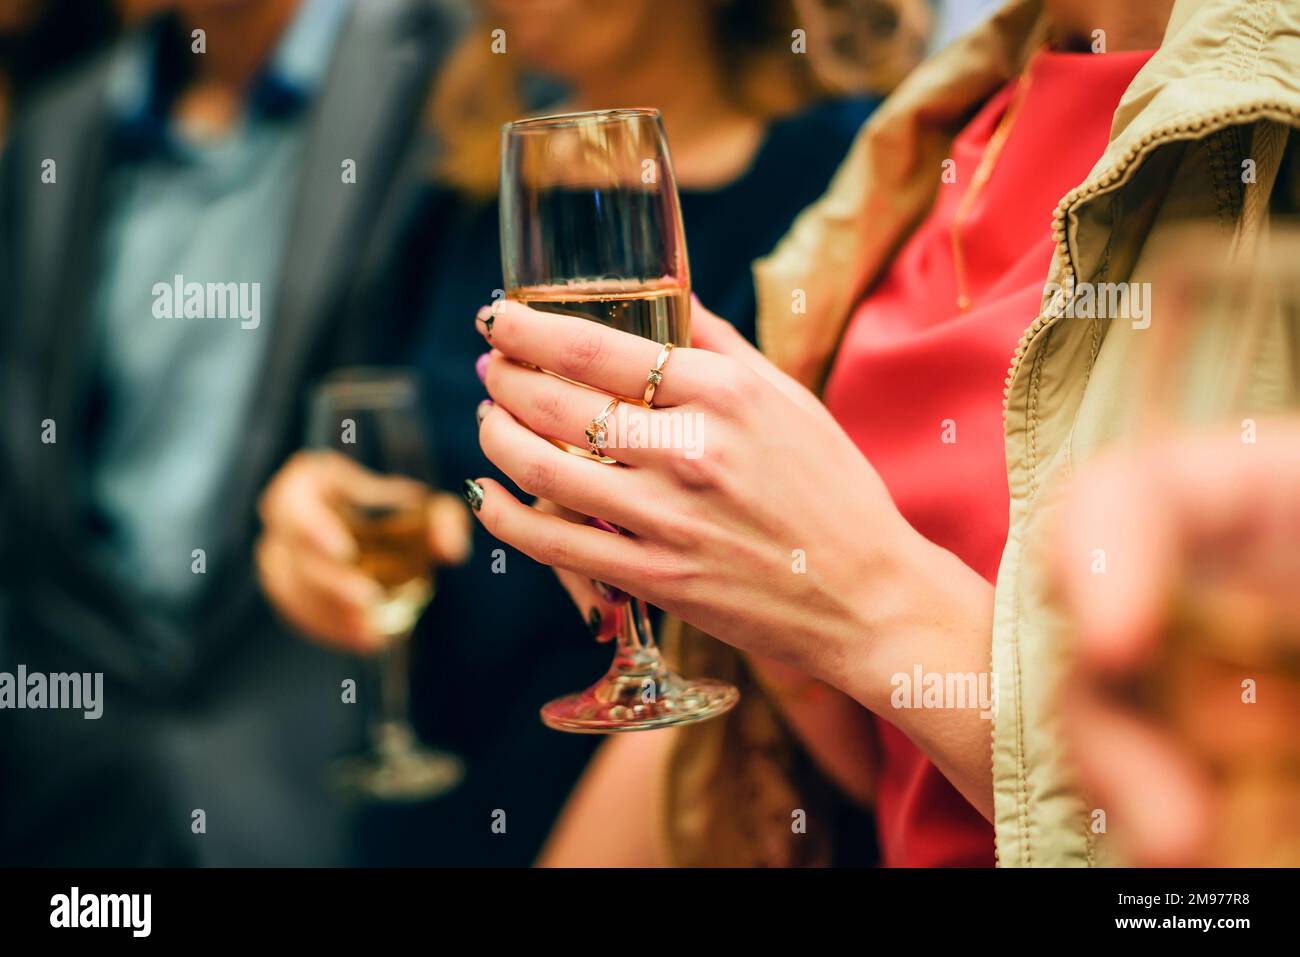 Champagne Bottle And Champagne Glass In Holiday Setting Stock Photo,  Picture and Royalty Free Image. Image 44184515.